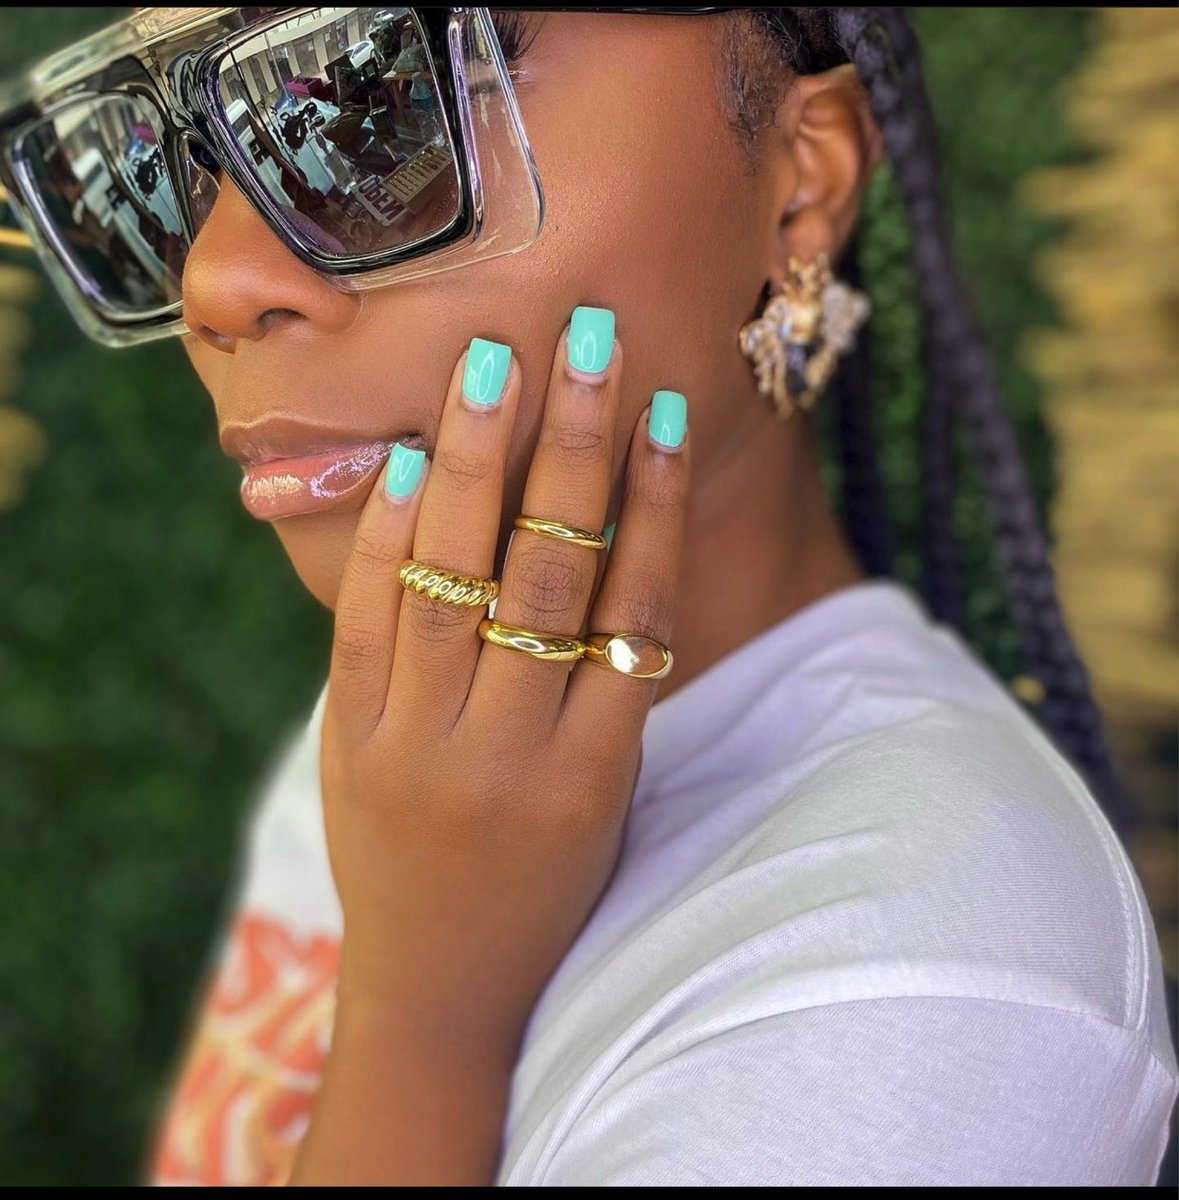 S T A C K ‘ D ✨
.
Our 18k gold plated rings are such a vibe! 
Only available in gold~
.
#yaffa #yaffabds #accessories #shop #fashion #fashionjewelry #18k #gold #goldplated #Barbados #shopinBarbados #new #newin #rings #stackedrings